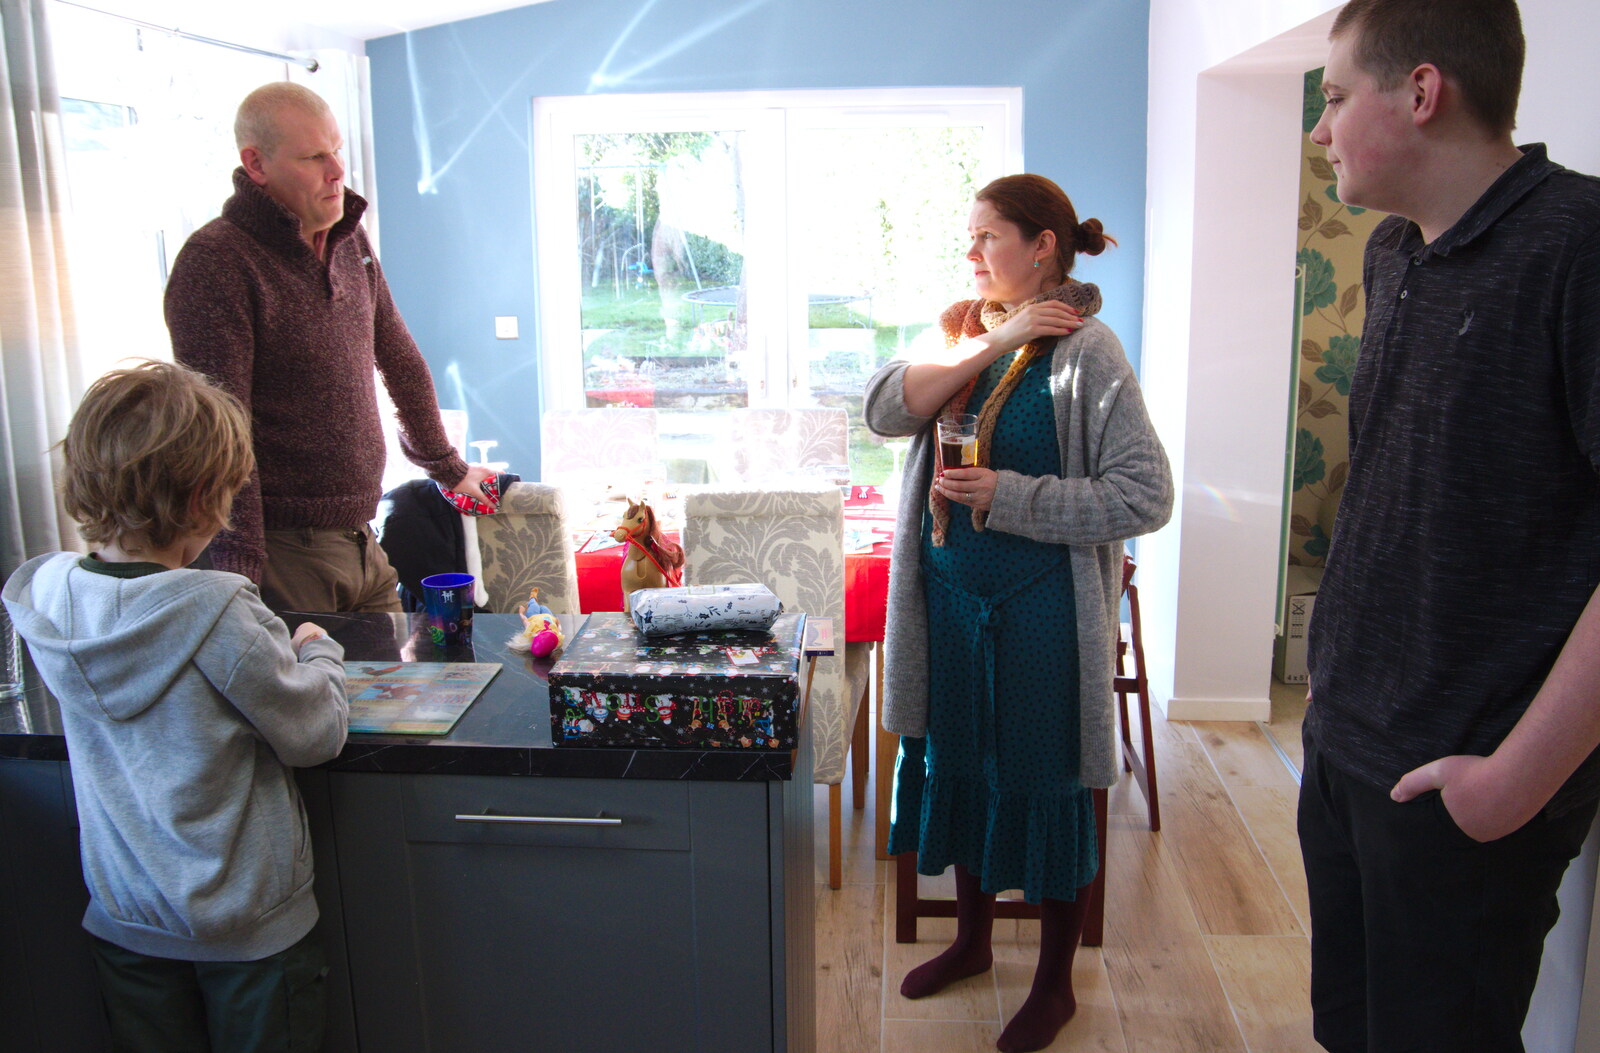 We chat to Bill in Paul and Claire's new kitchen from Christmas Day, Brome, Suffolk - 25th December 2019